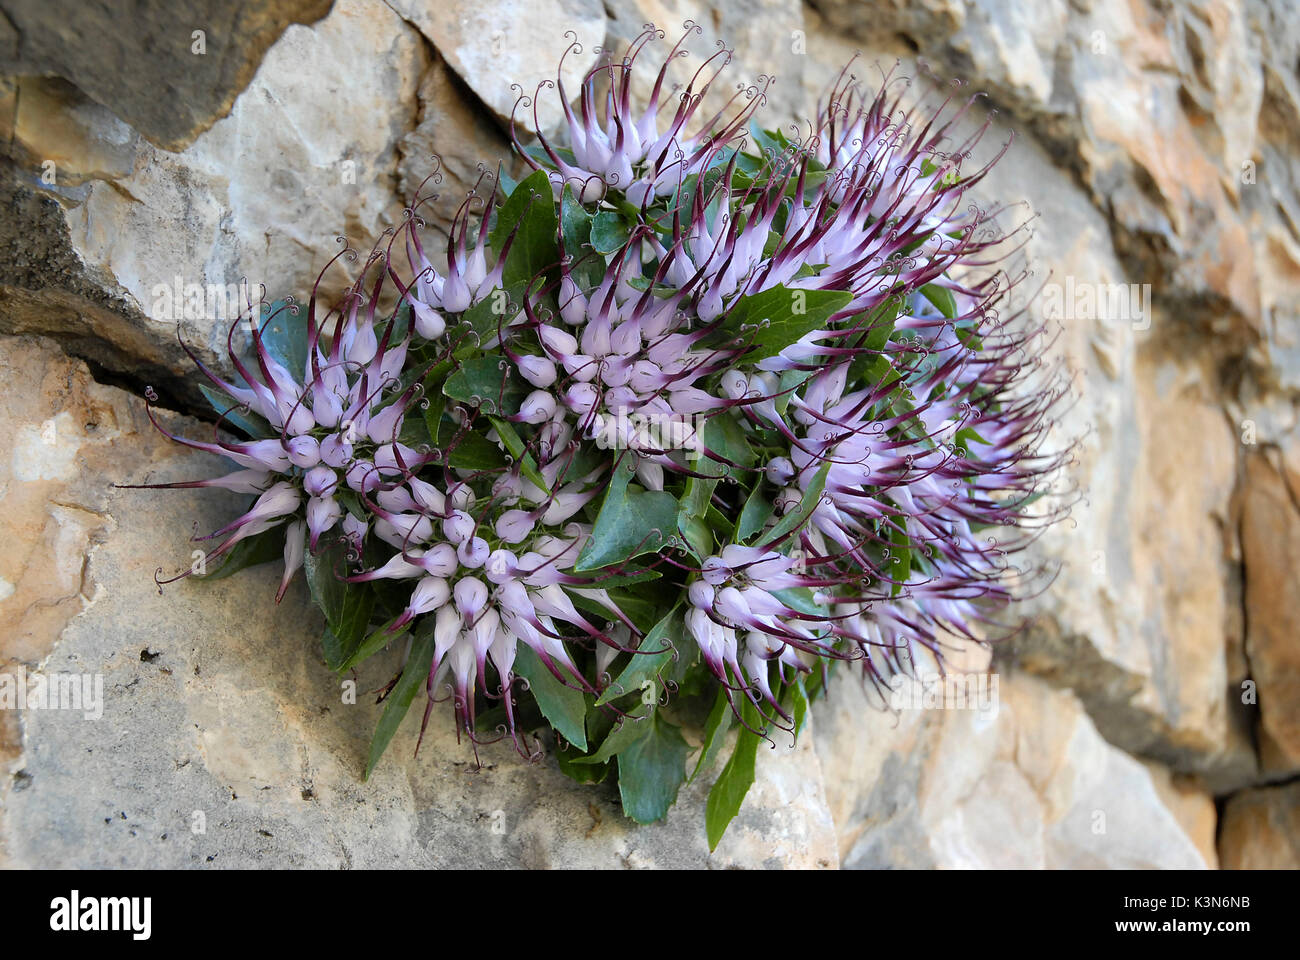 Dolomites, South Tyrol, Italy.The Physoplexis comosa Stock Photo